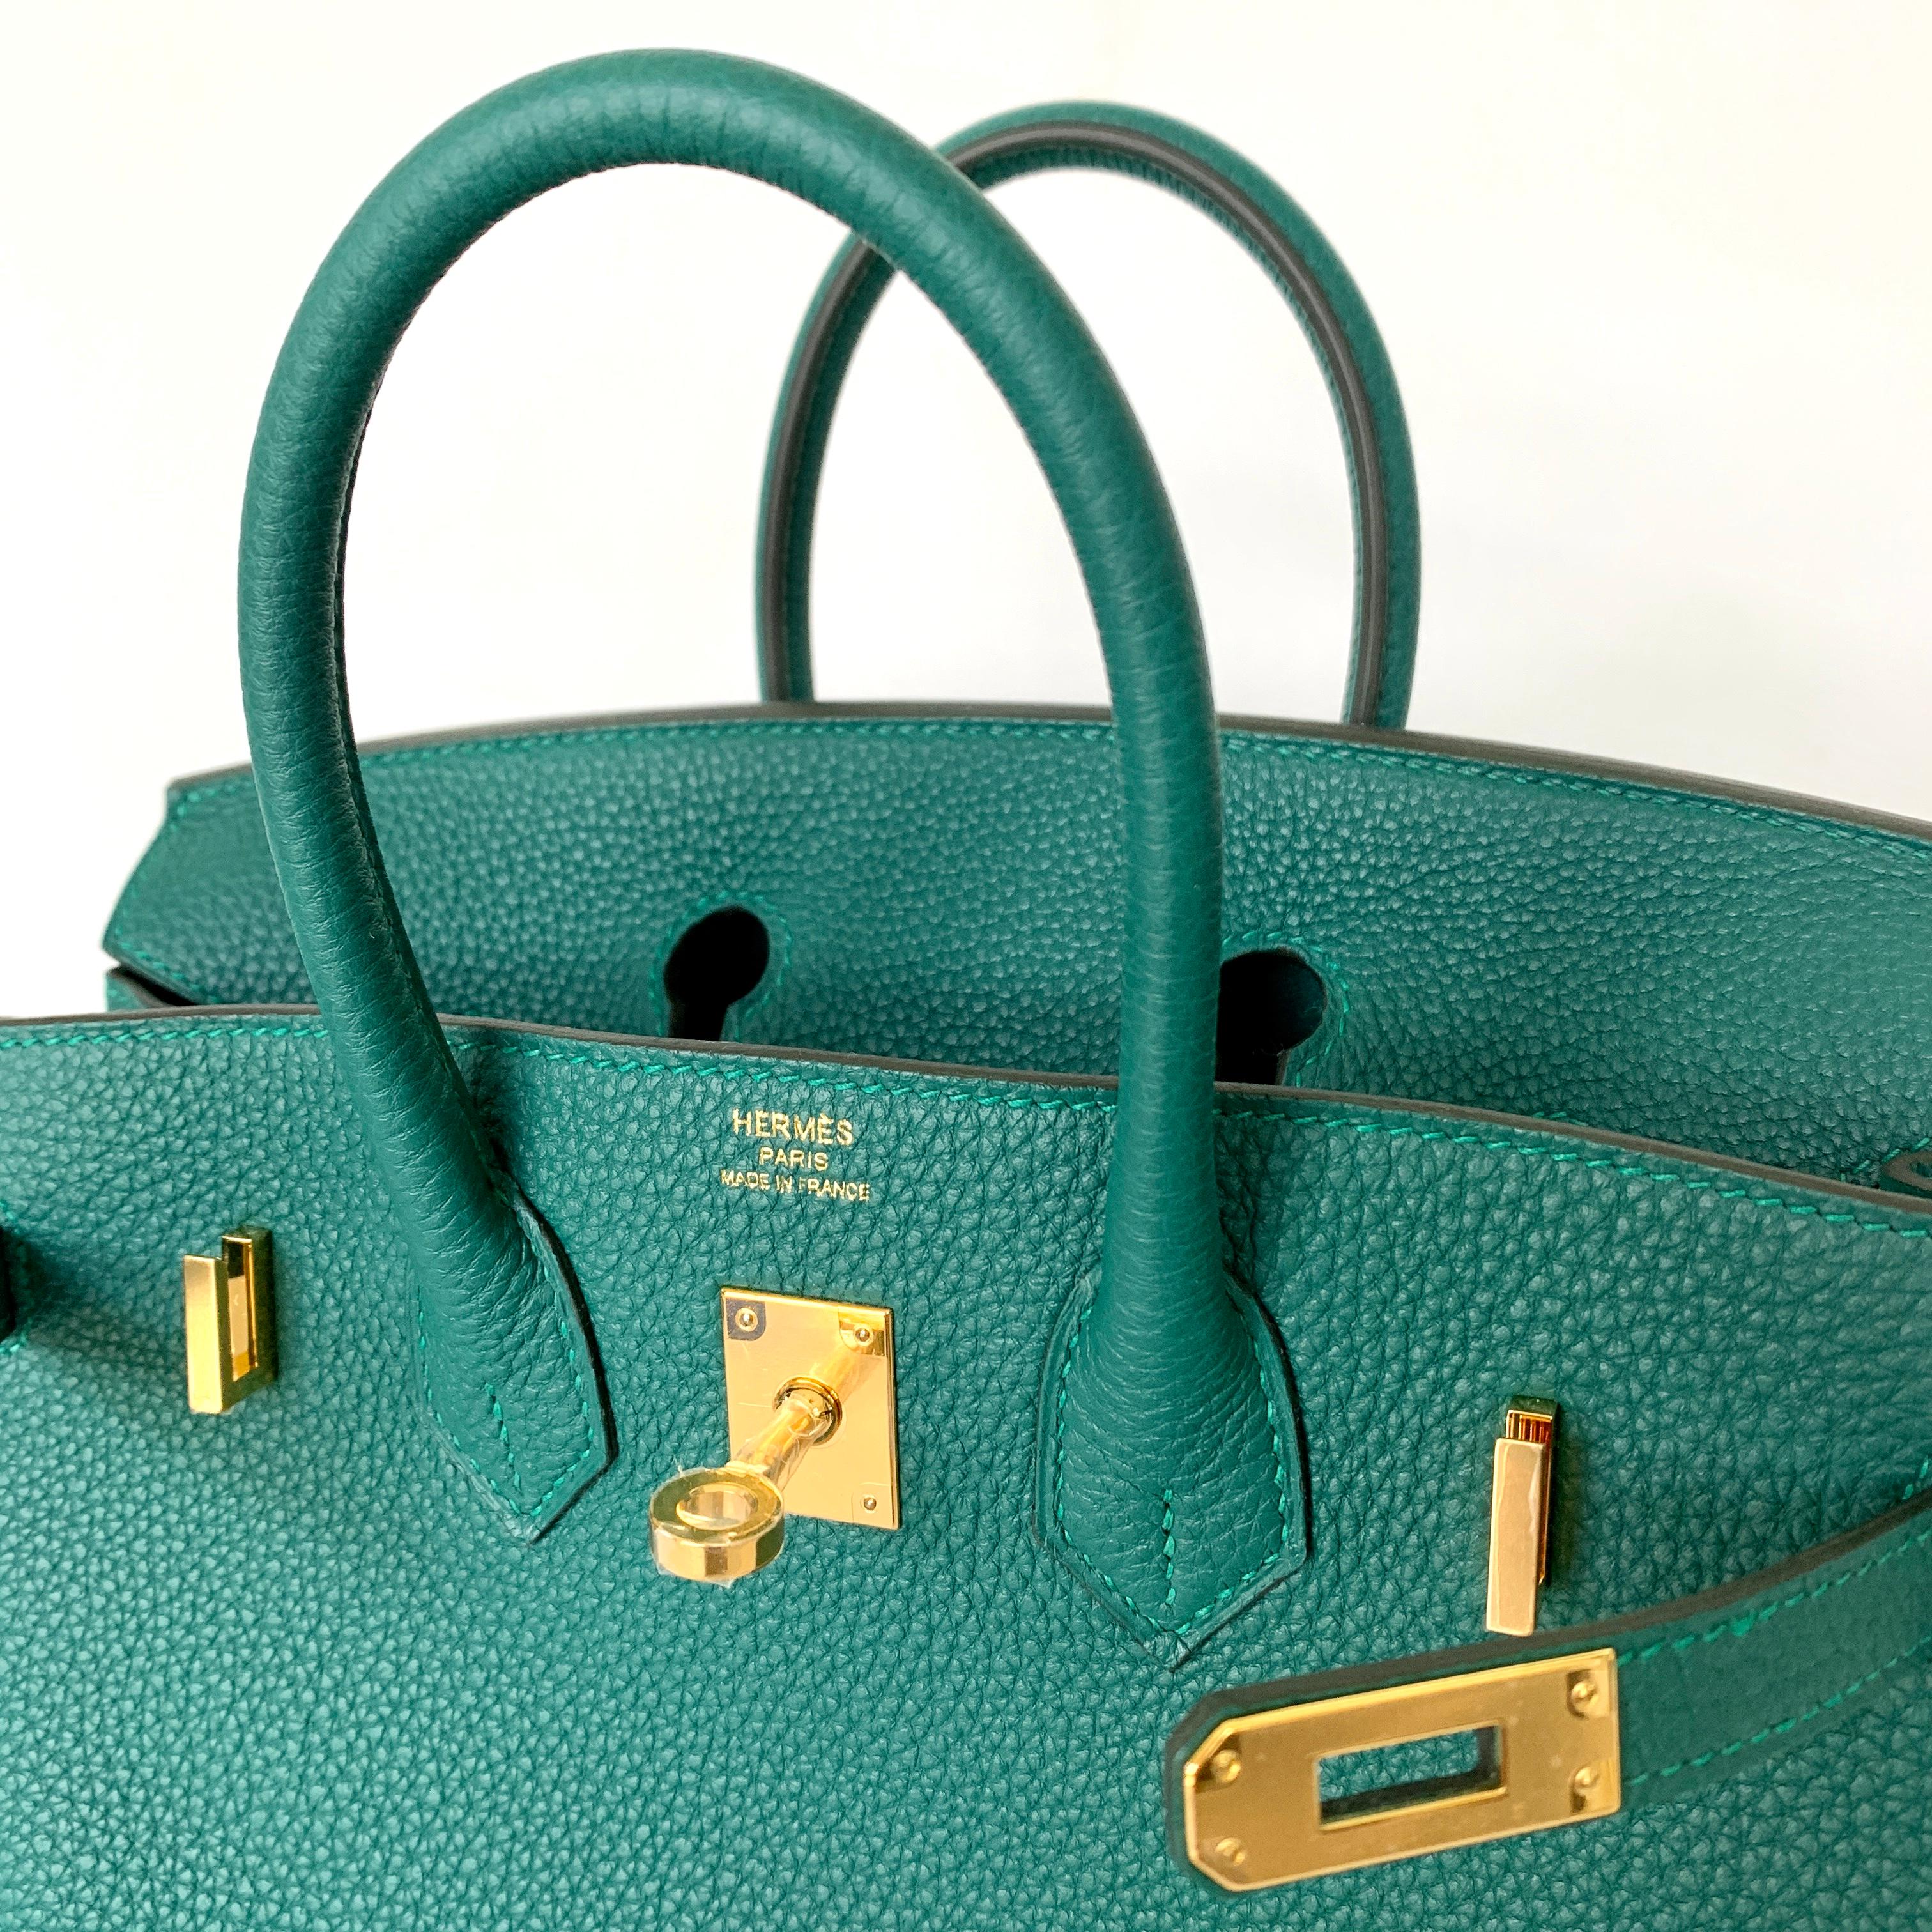 

Hermès Birkin 25 cm
Tonal Stitching
Togo Leather, the most durable leather
The interior is lined with Malachite chevre and has a zip pocket with an Hermès engraved zipper pull and a slit pocket
Plastic on the hardware
Malachite , a deep forest